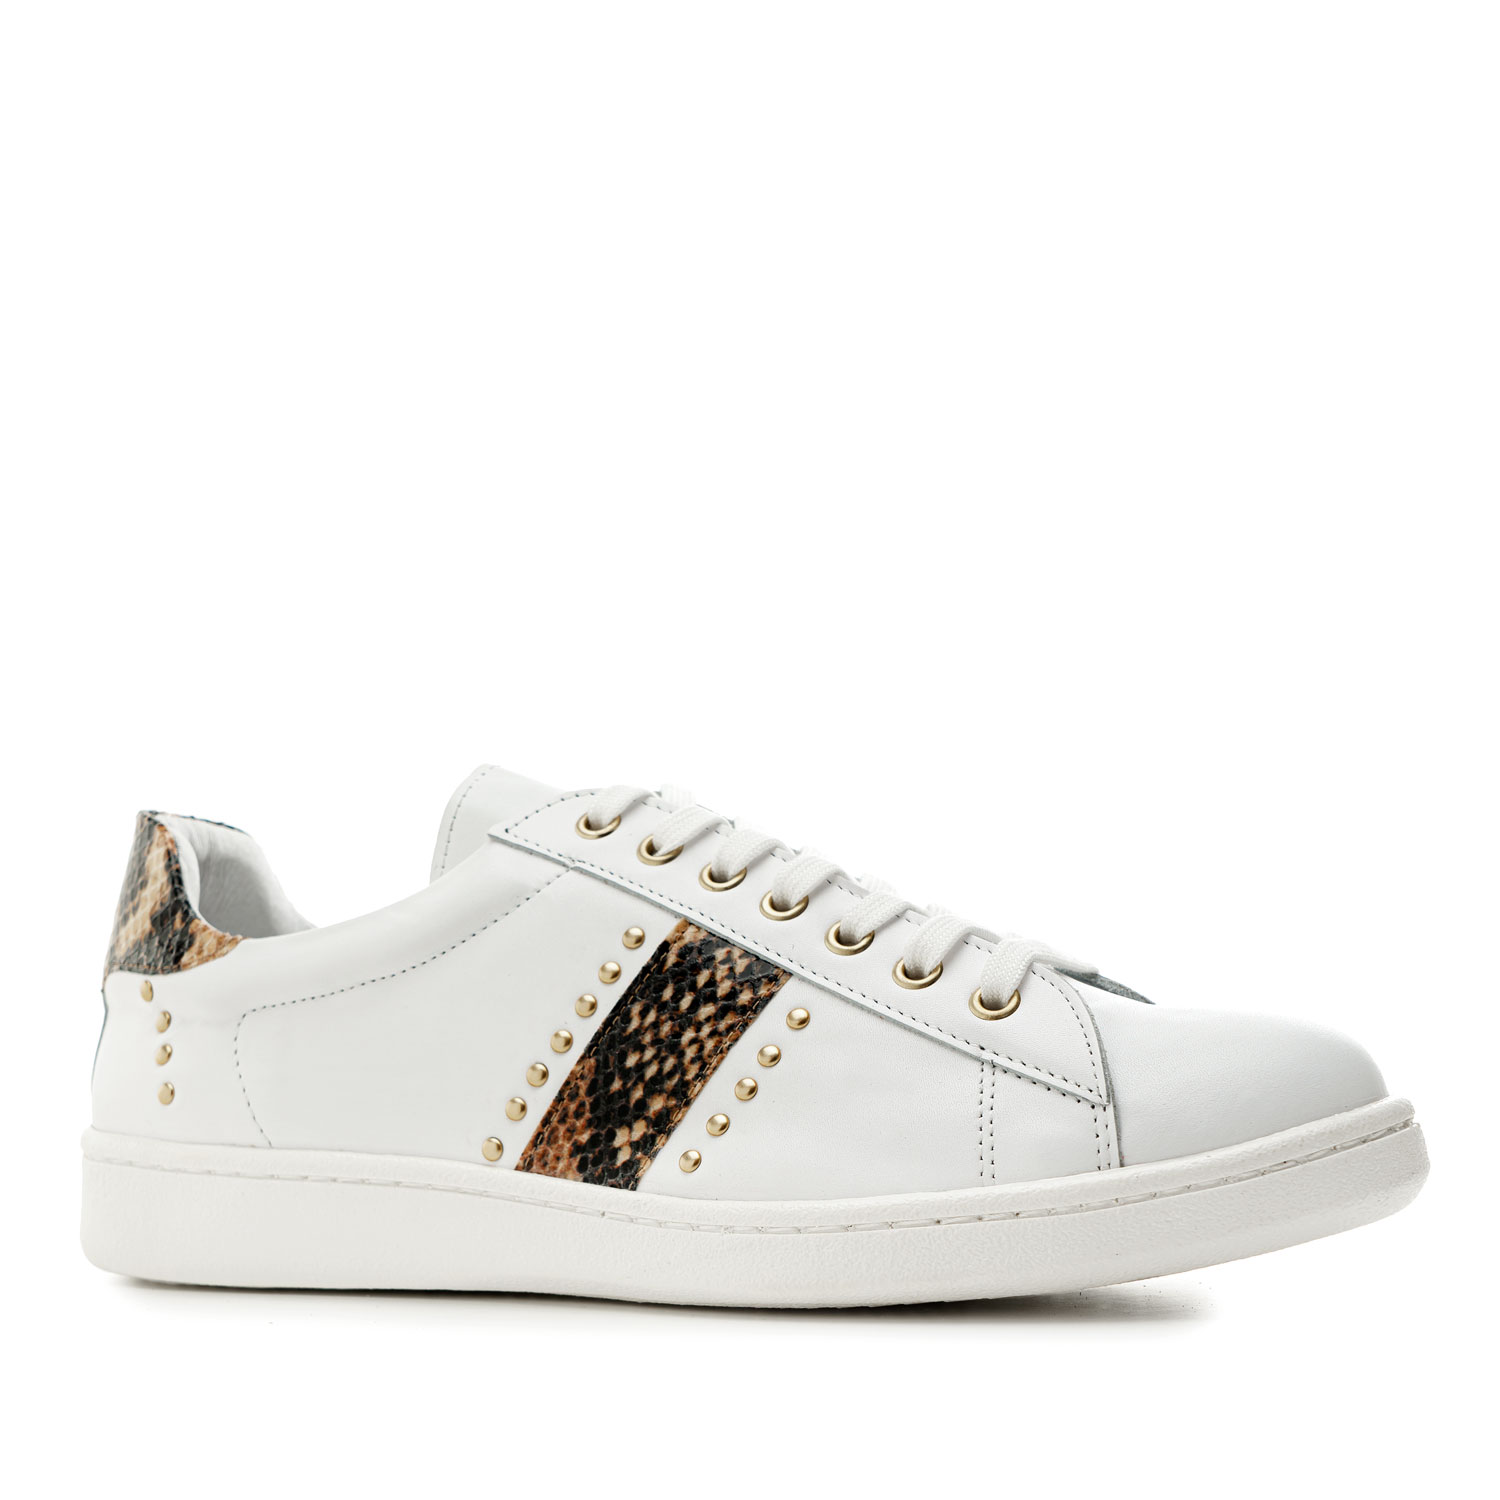 Tack Trainers in White Leather 